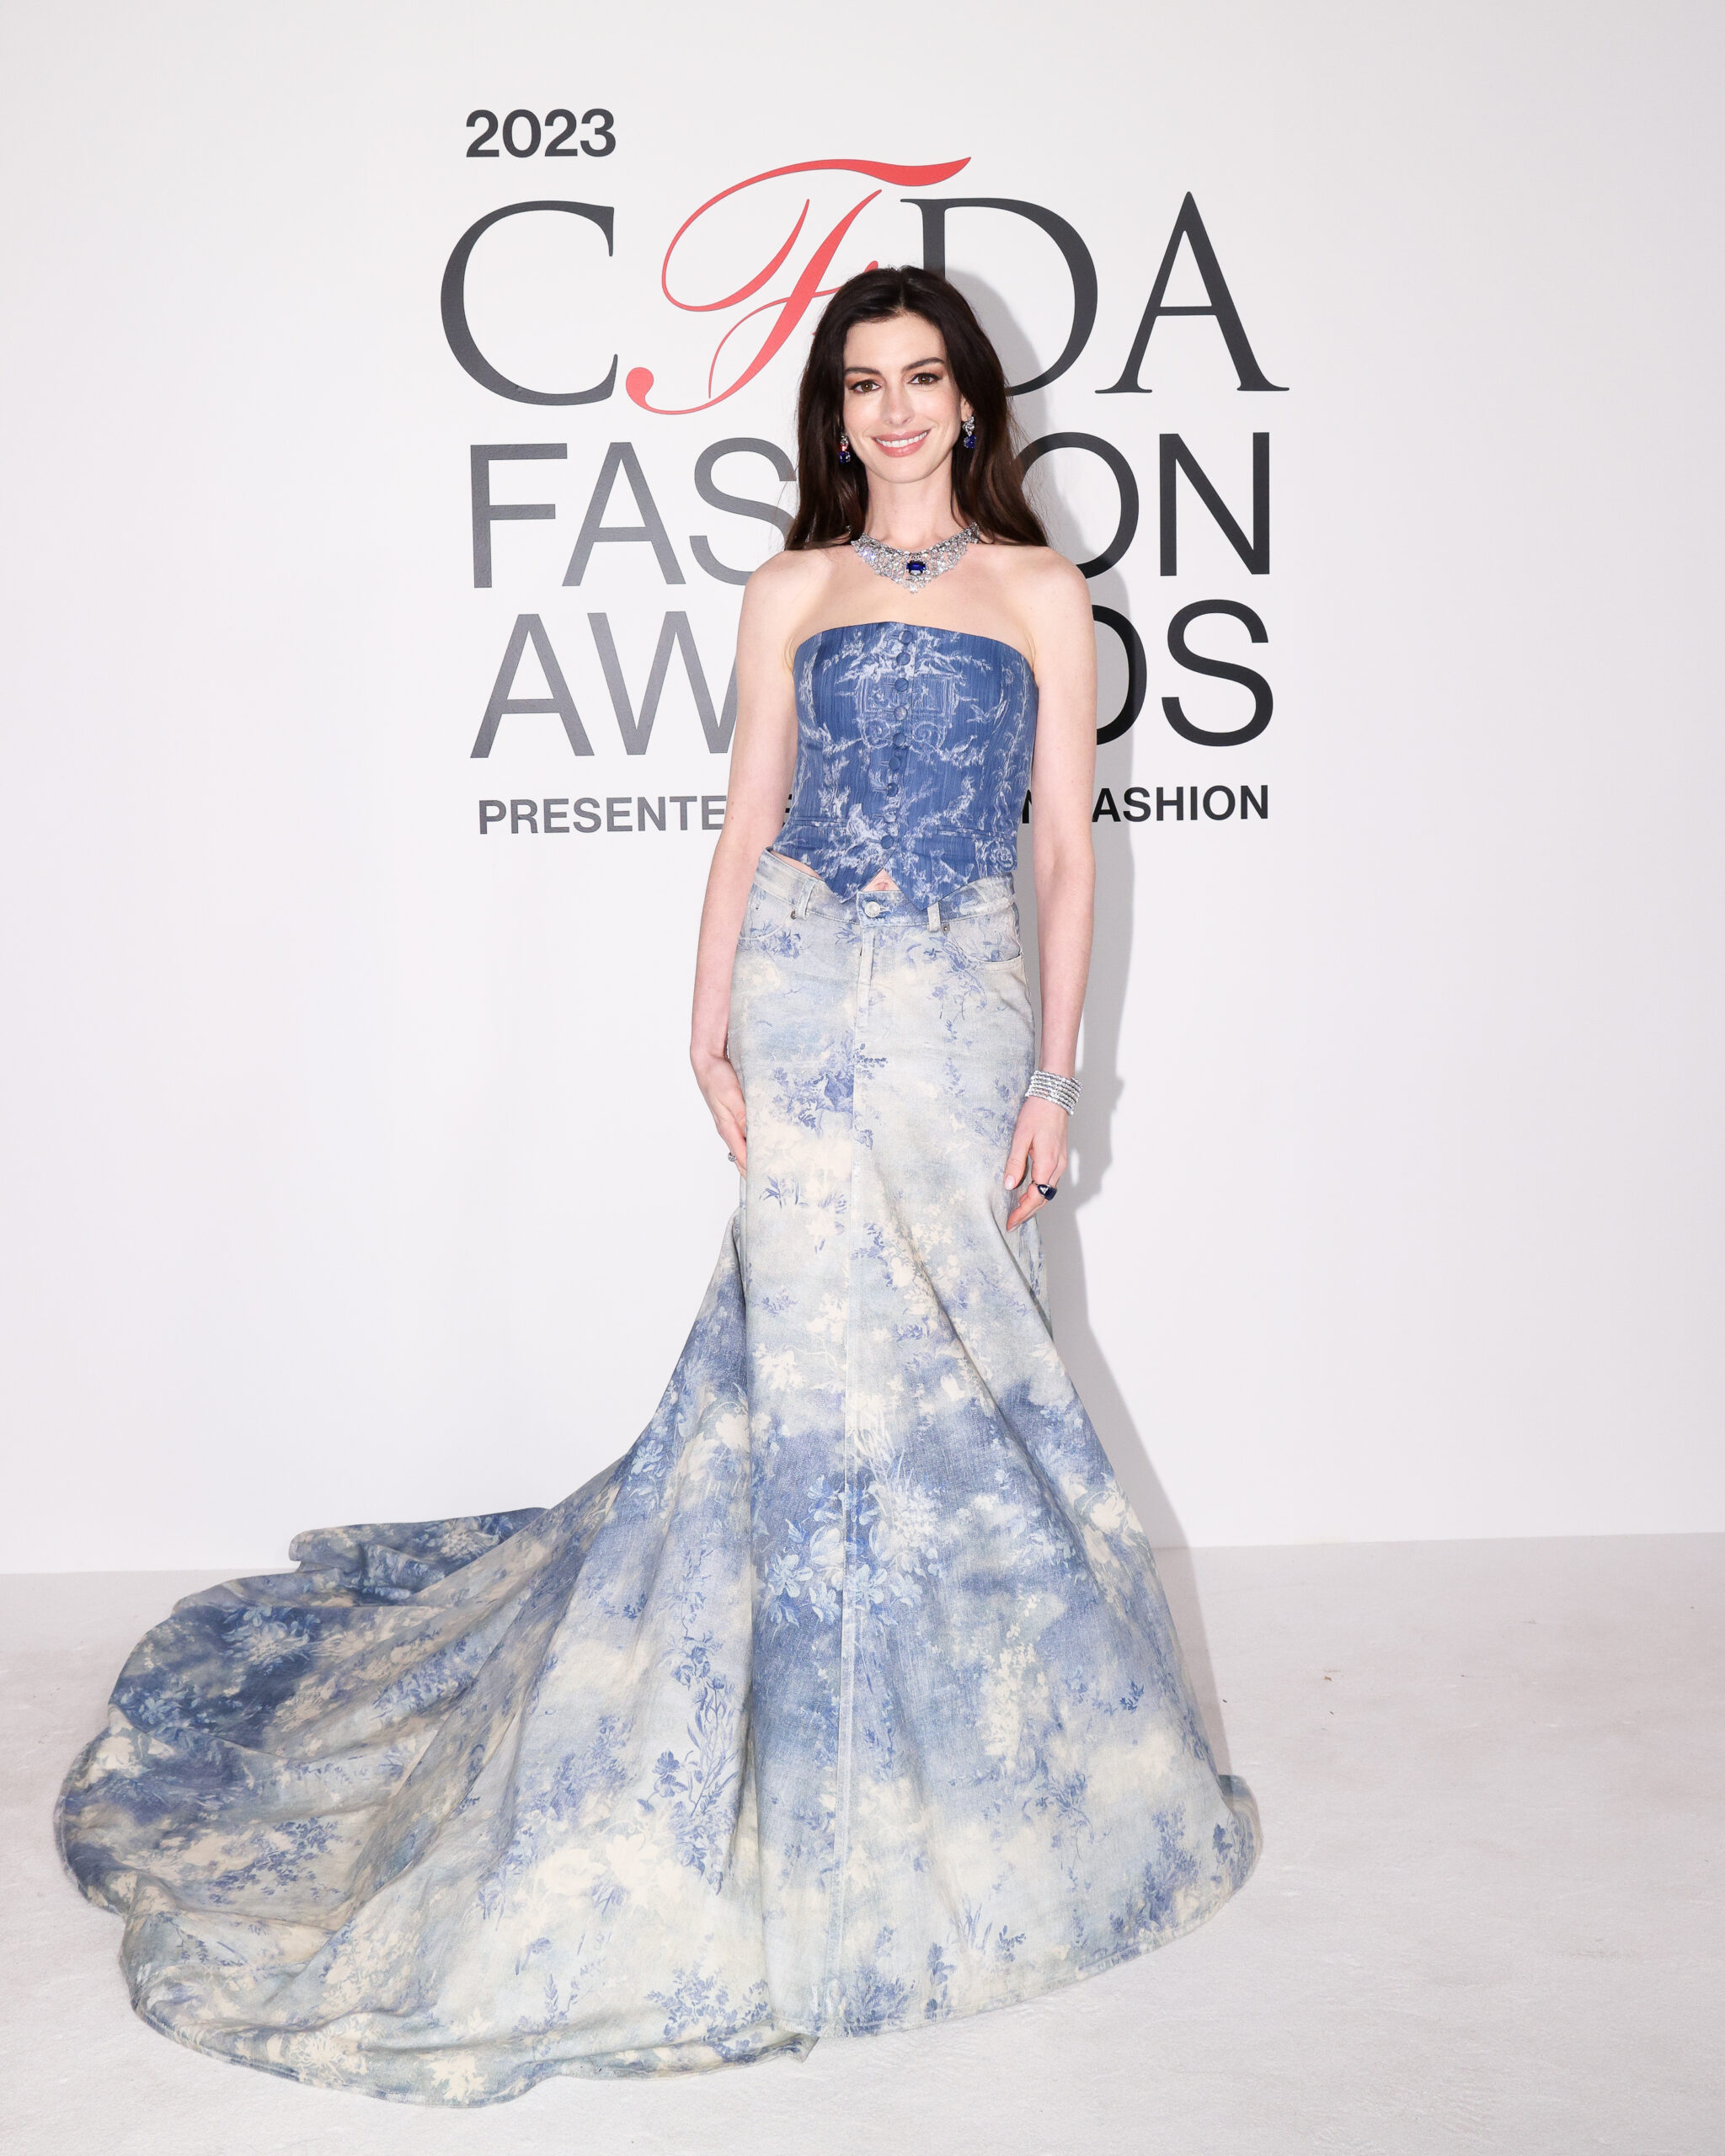 Anne Hathaway radiates grace at the 2023 CFDA Awards, donning a breathtaking Ralph Lauren SS24 gown with an exquisite blue floral design that echoes the freshness of spring.